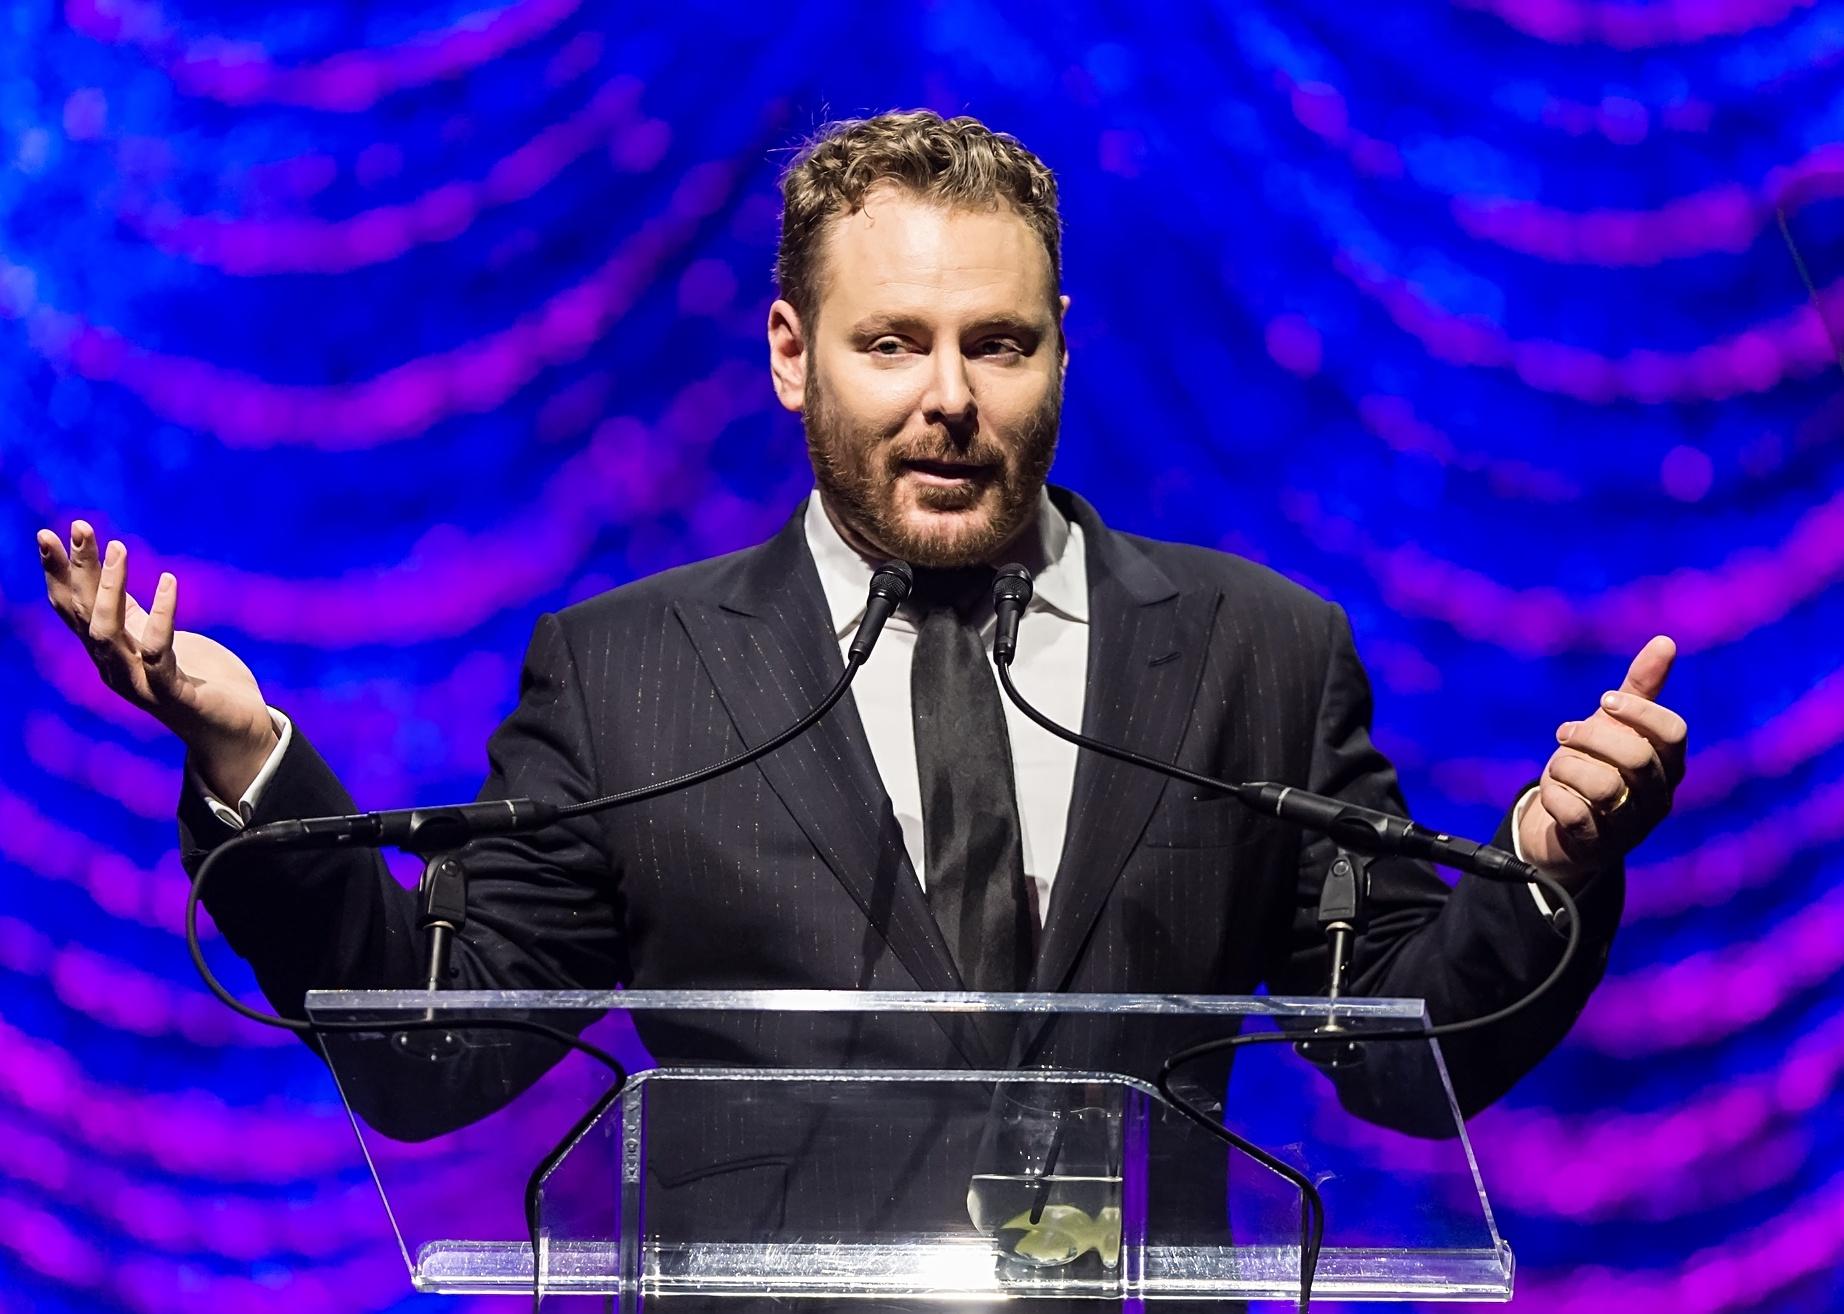 Sean Parker in a black suit speaking at a podium.